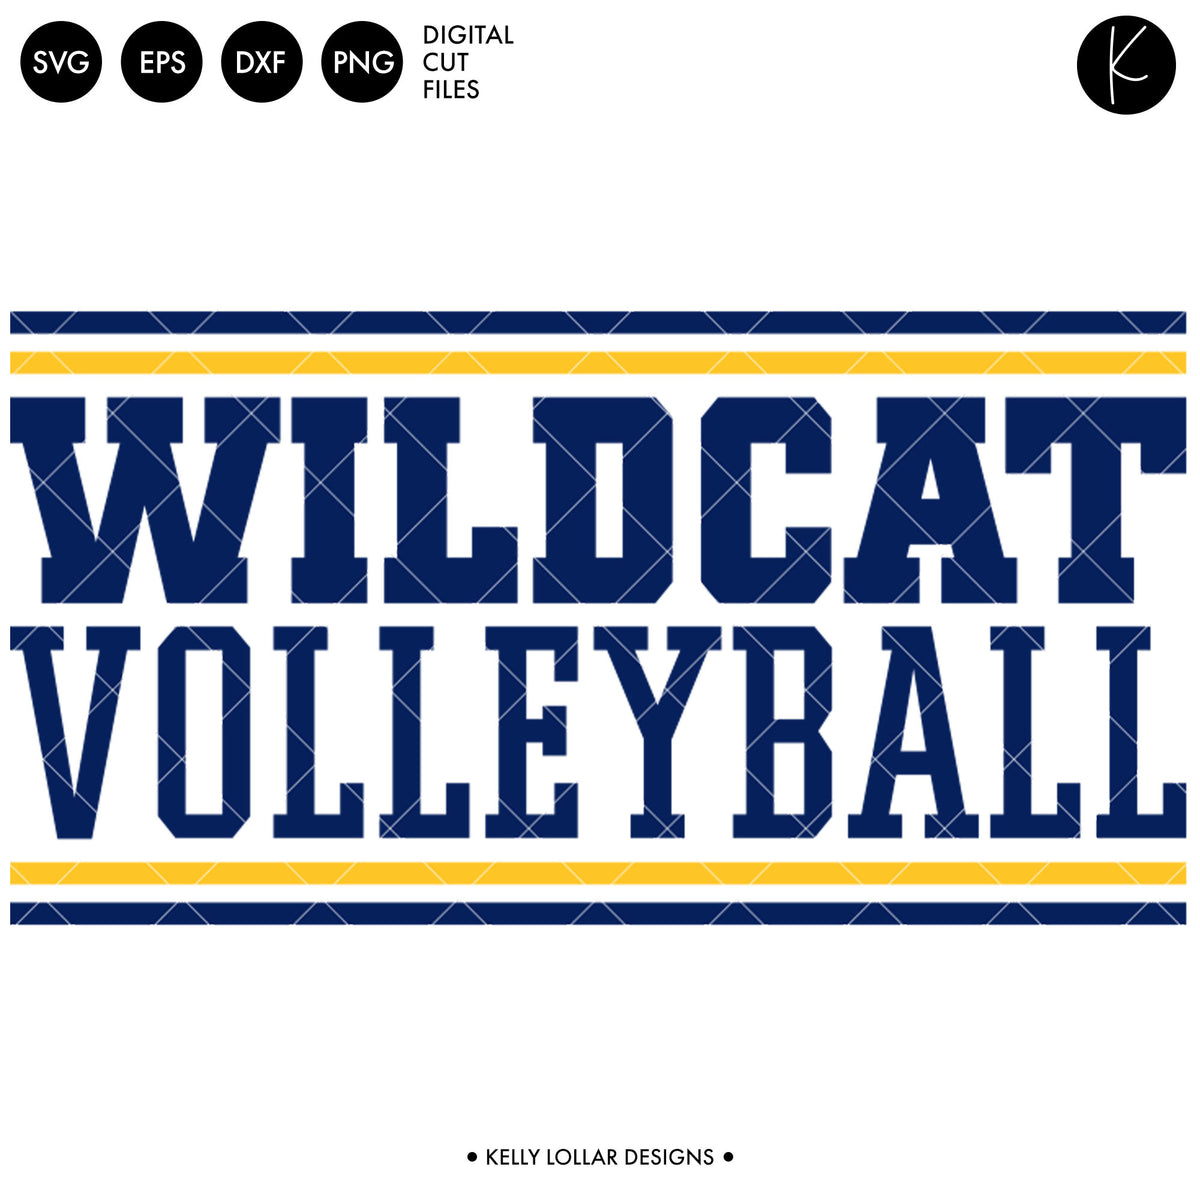 Wildcats Volleyball Bundle | SVG DXF EPS PNG Cut Files